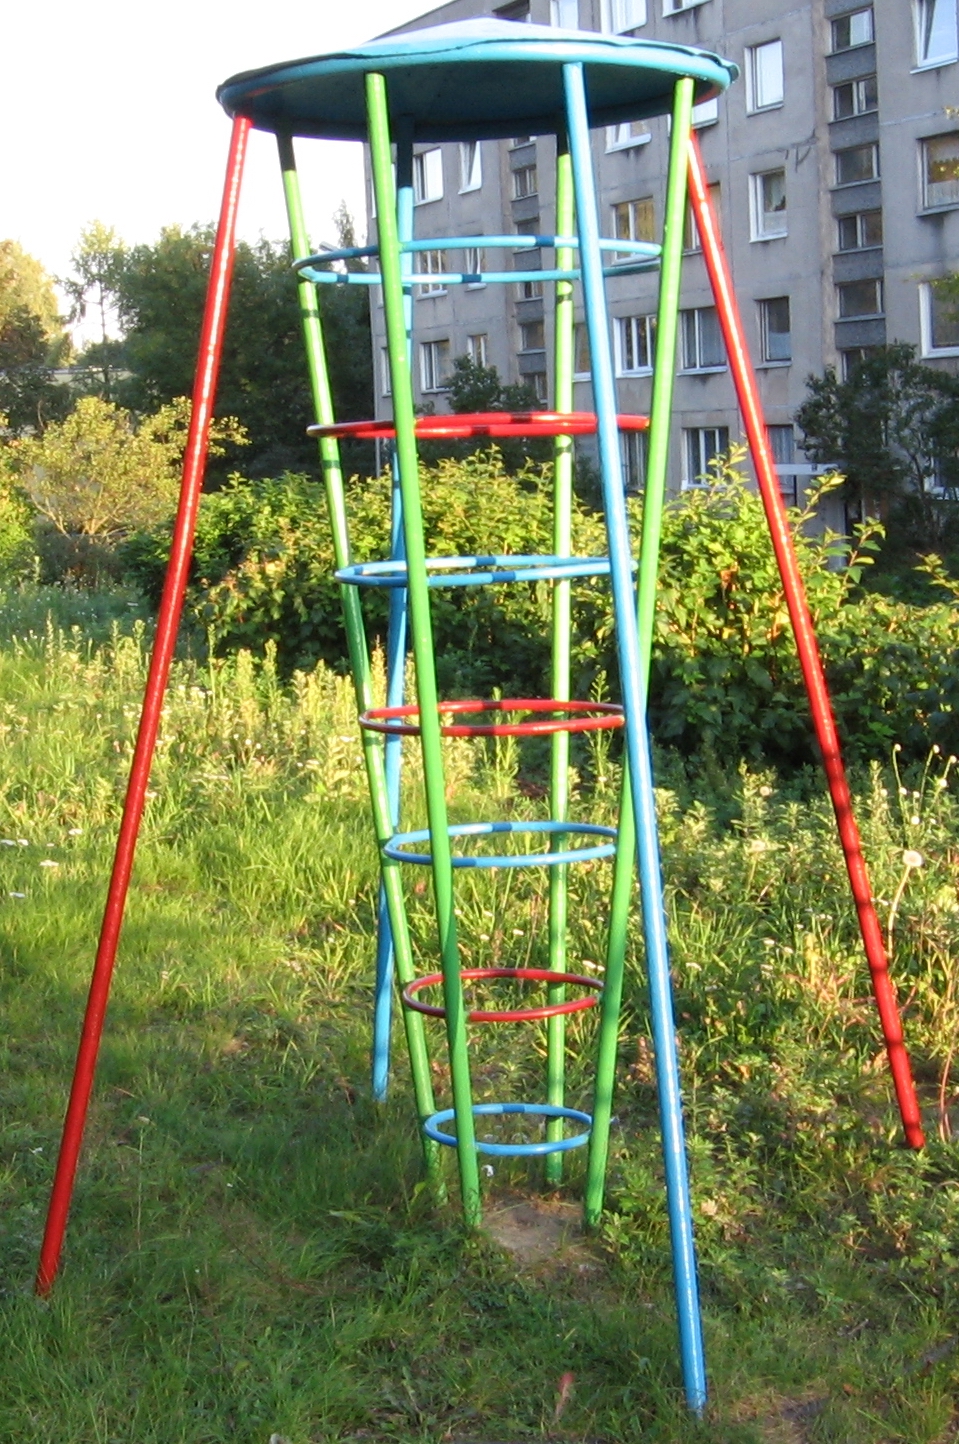 A colourful rocket shaped climbing gym stands in an overgrown field in front of a grey apartment block